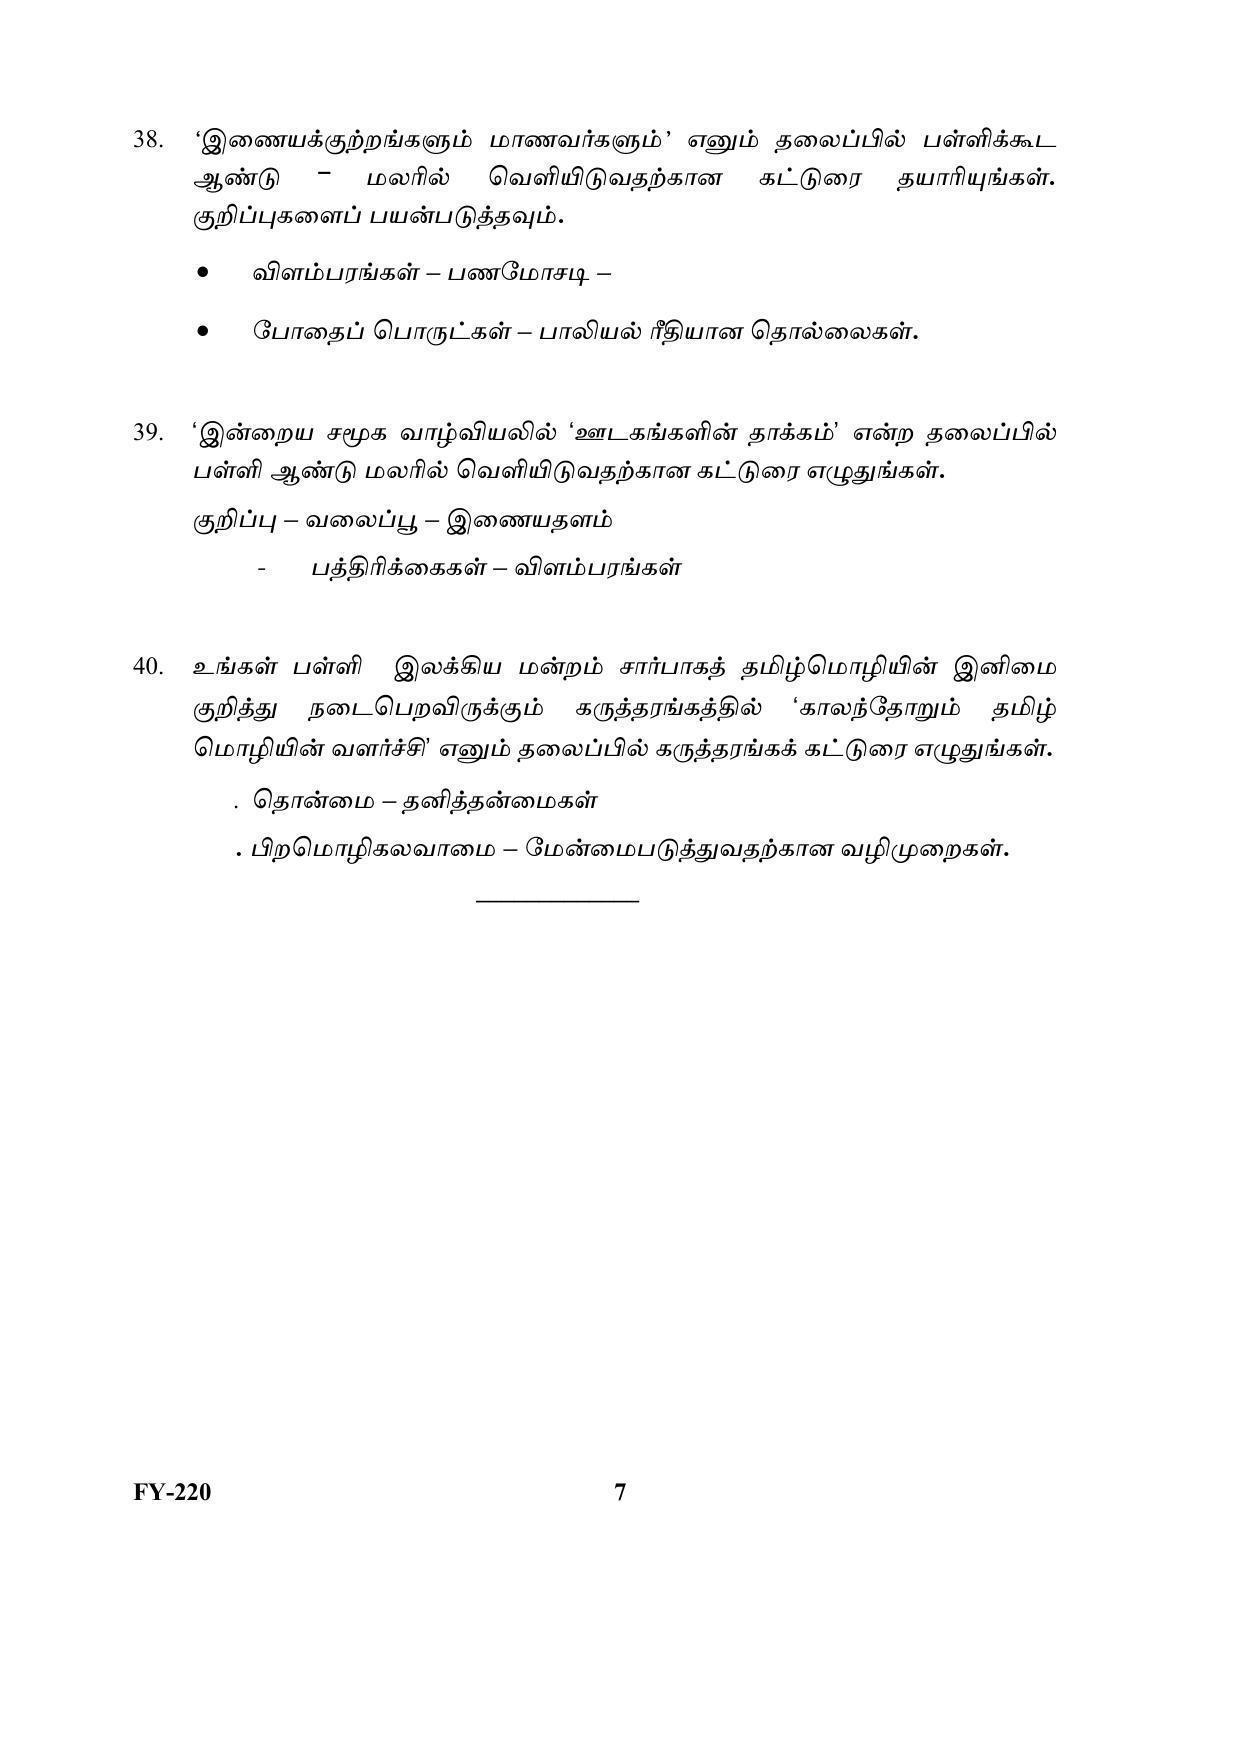 Kerala Plus One (Class 11th) Part-III Tamil-Optional Question Paper 2021 - Page 7